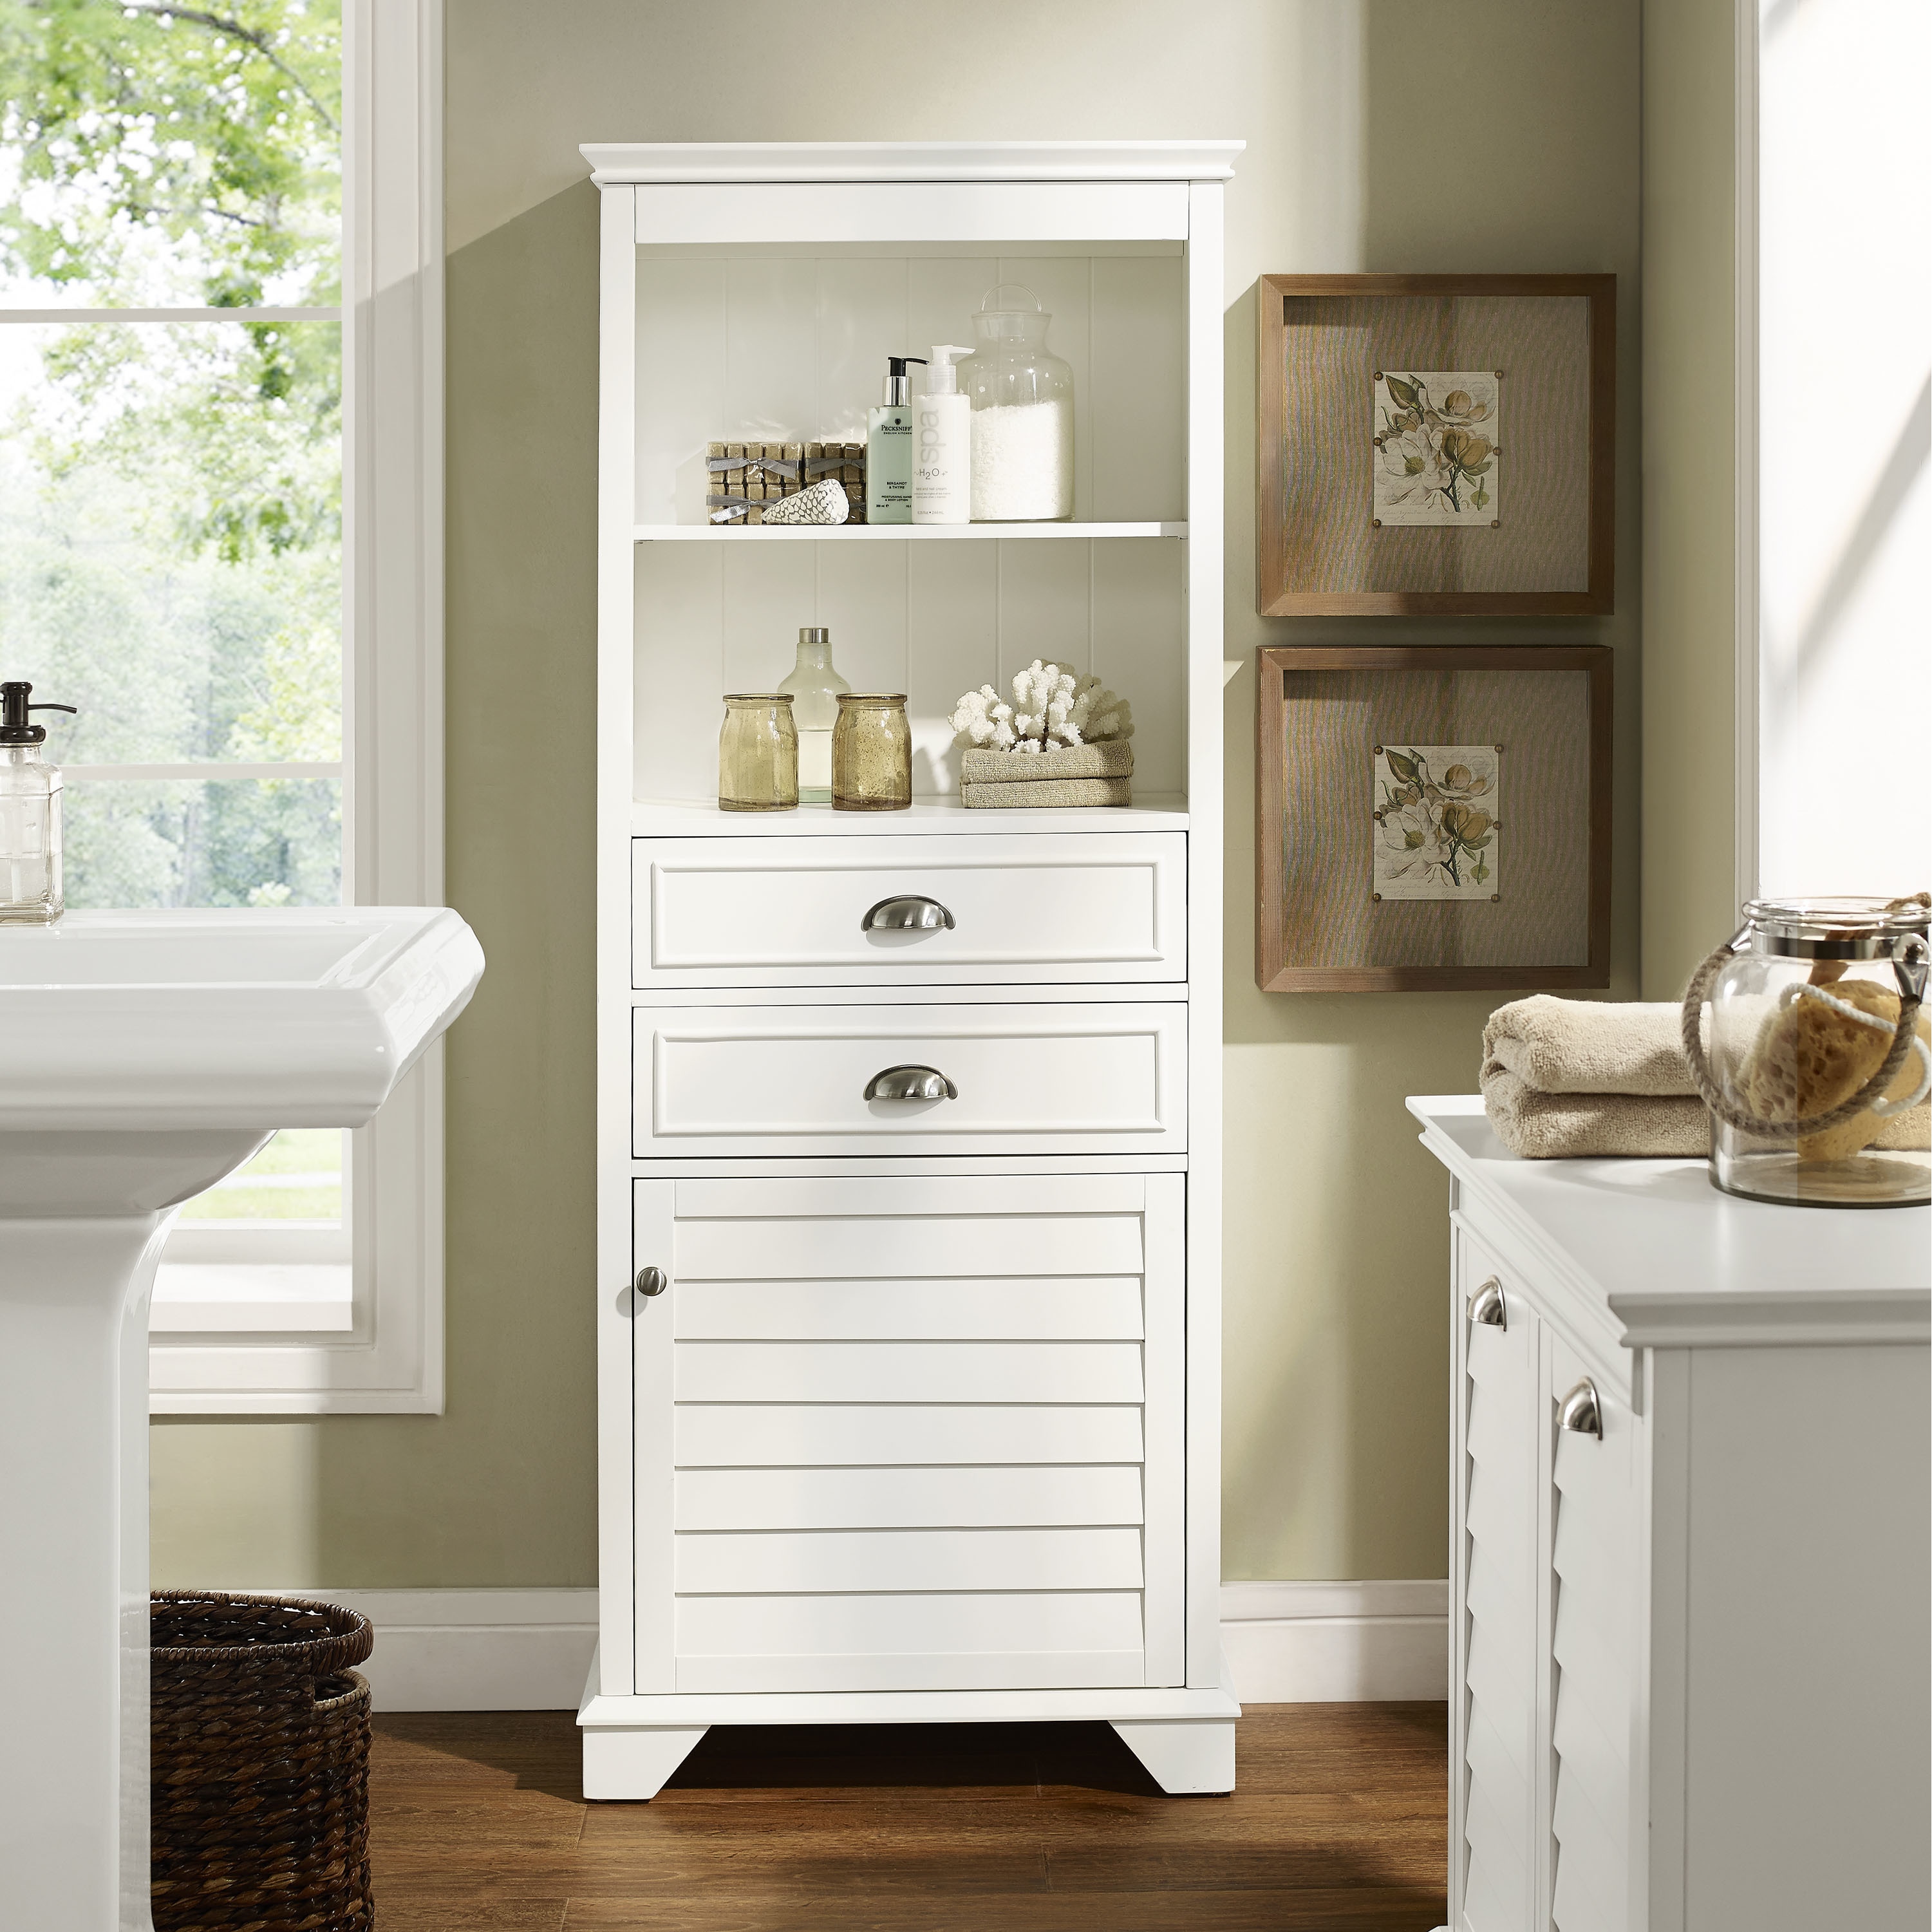  Bathroom Storage Cabinet With Drawers